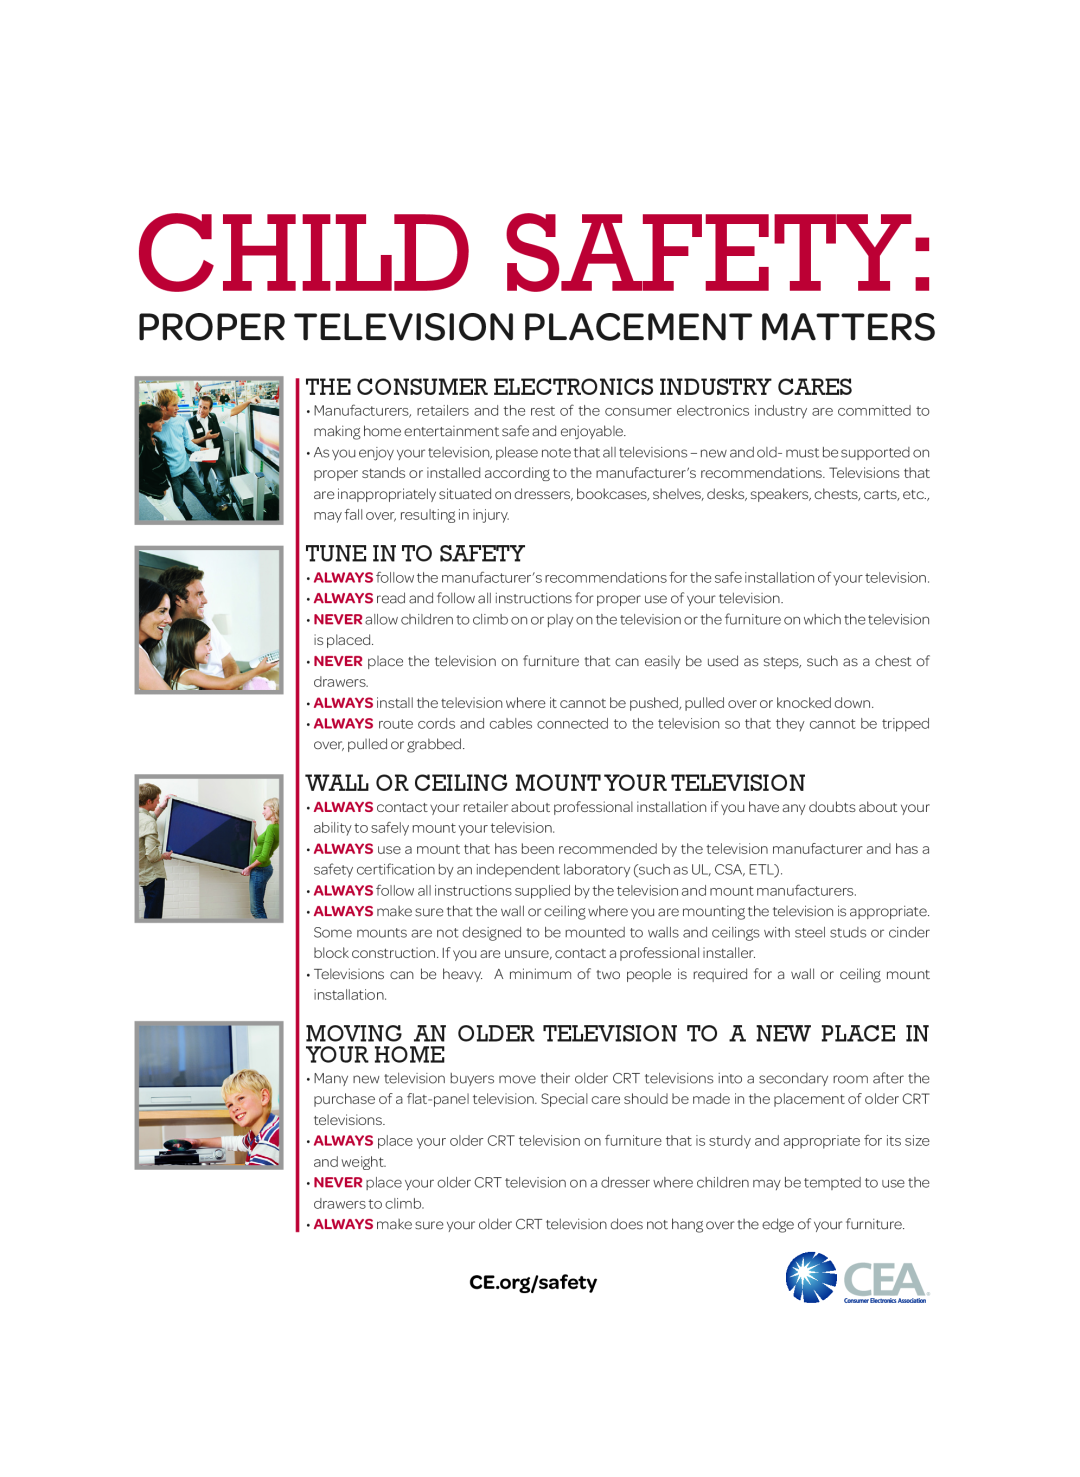 LG Electronics 55UF7600, 49UF7600 CE.org/safety, Child Safety, Proper Television Placement Matters, Tune In To Safety 